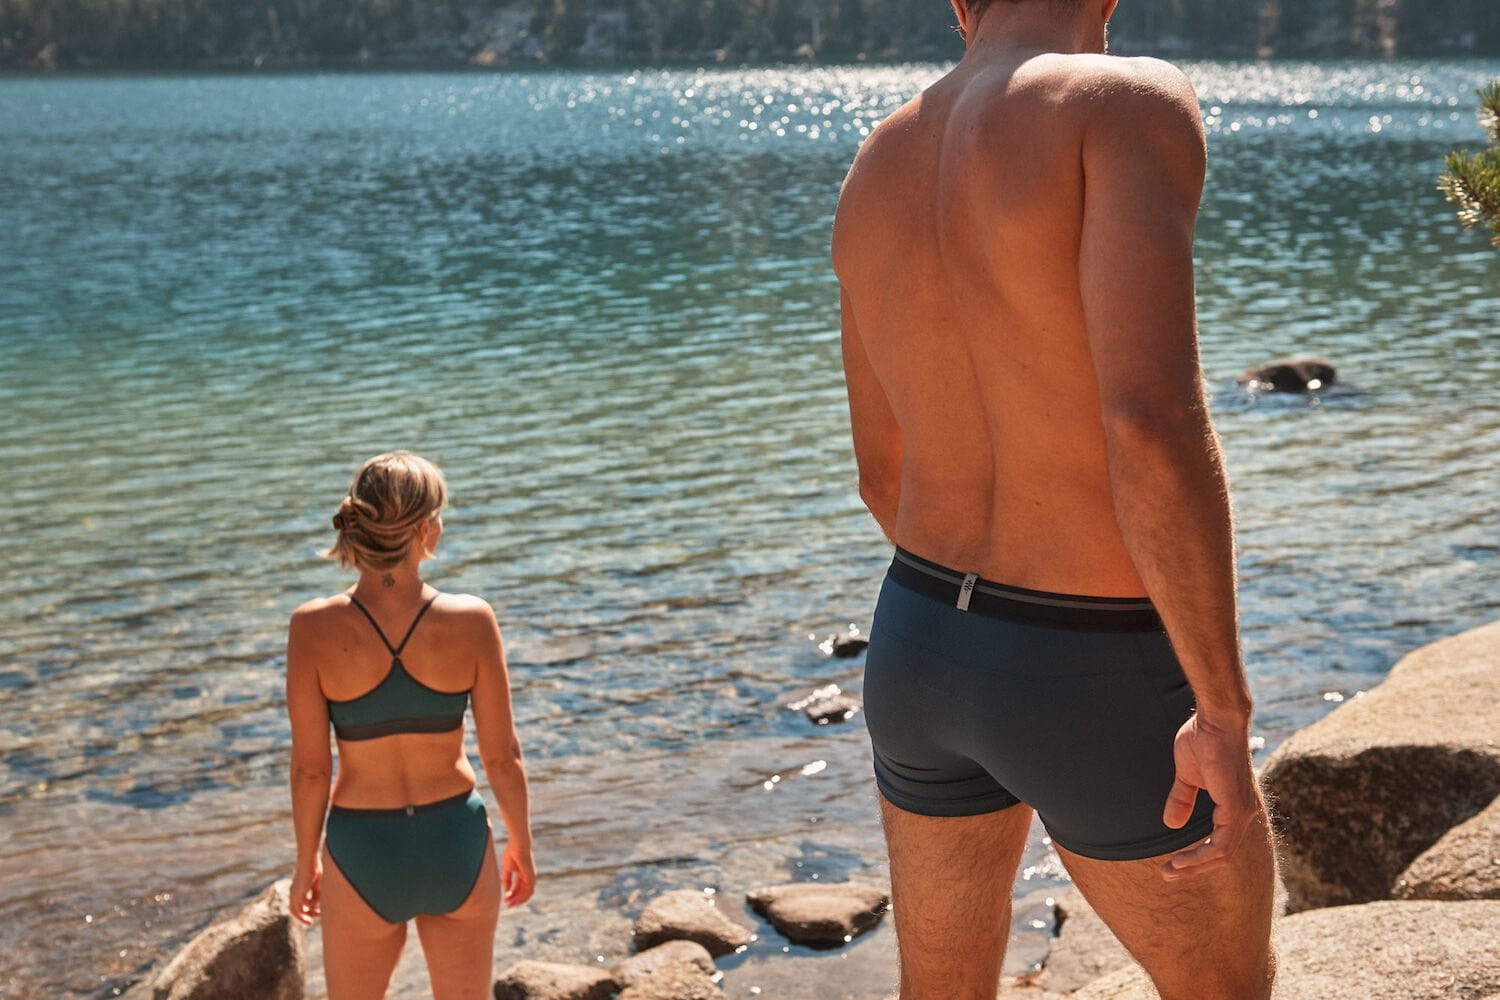 Hiking Underwear is the Outdoor Gear I Never Knew I Needed - We